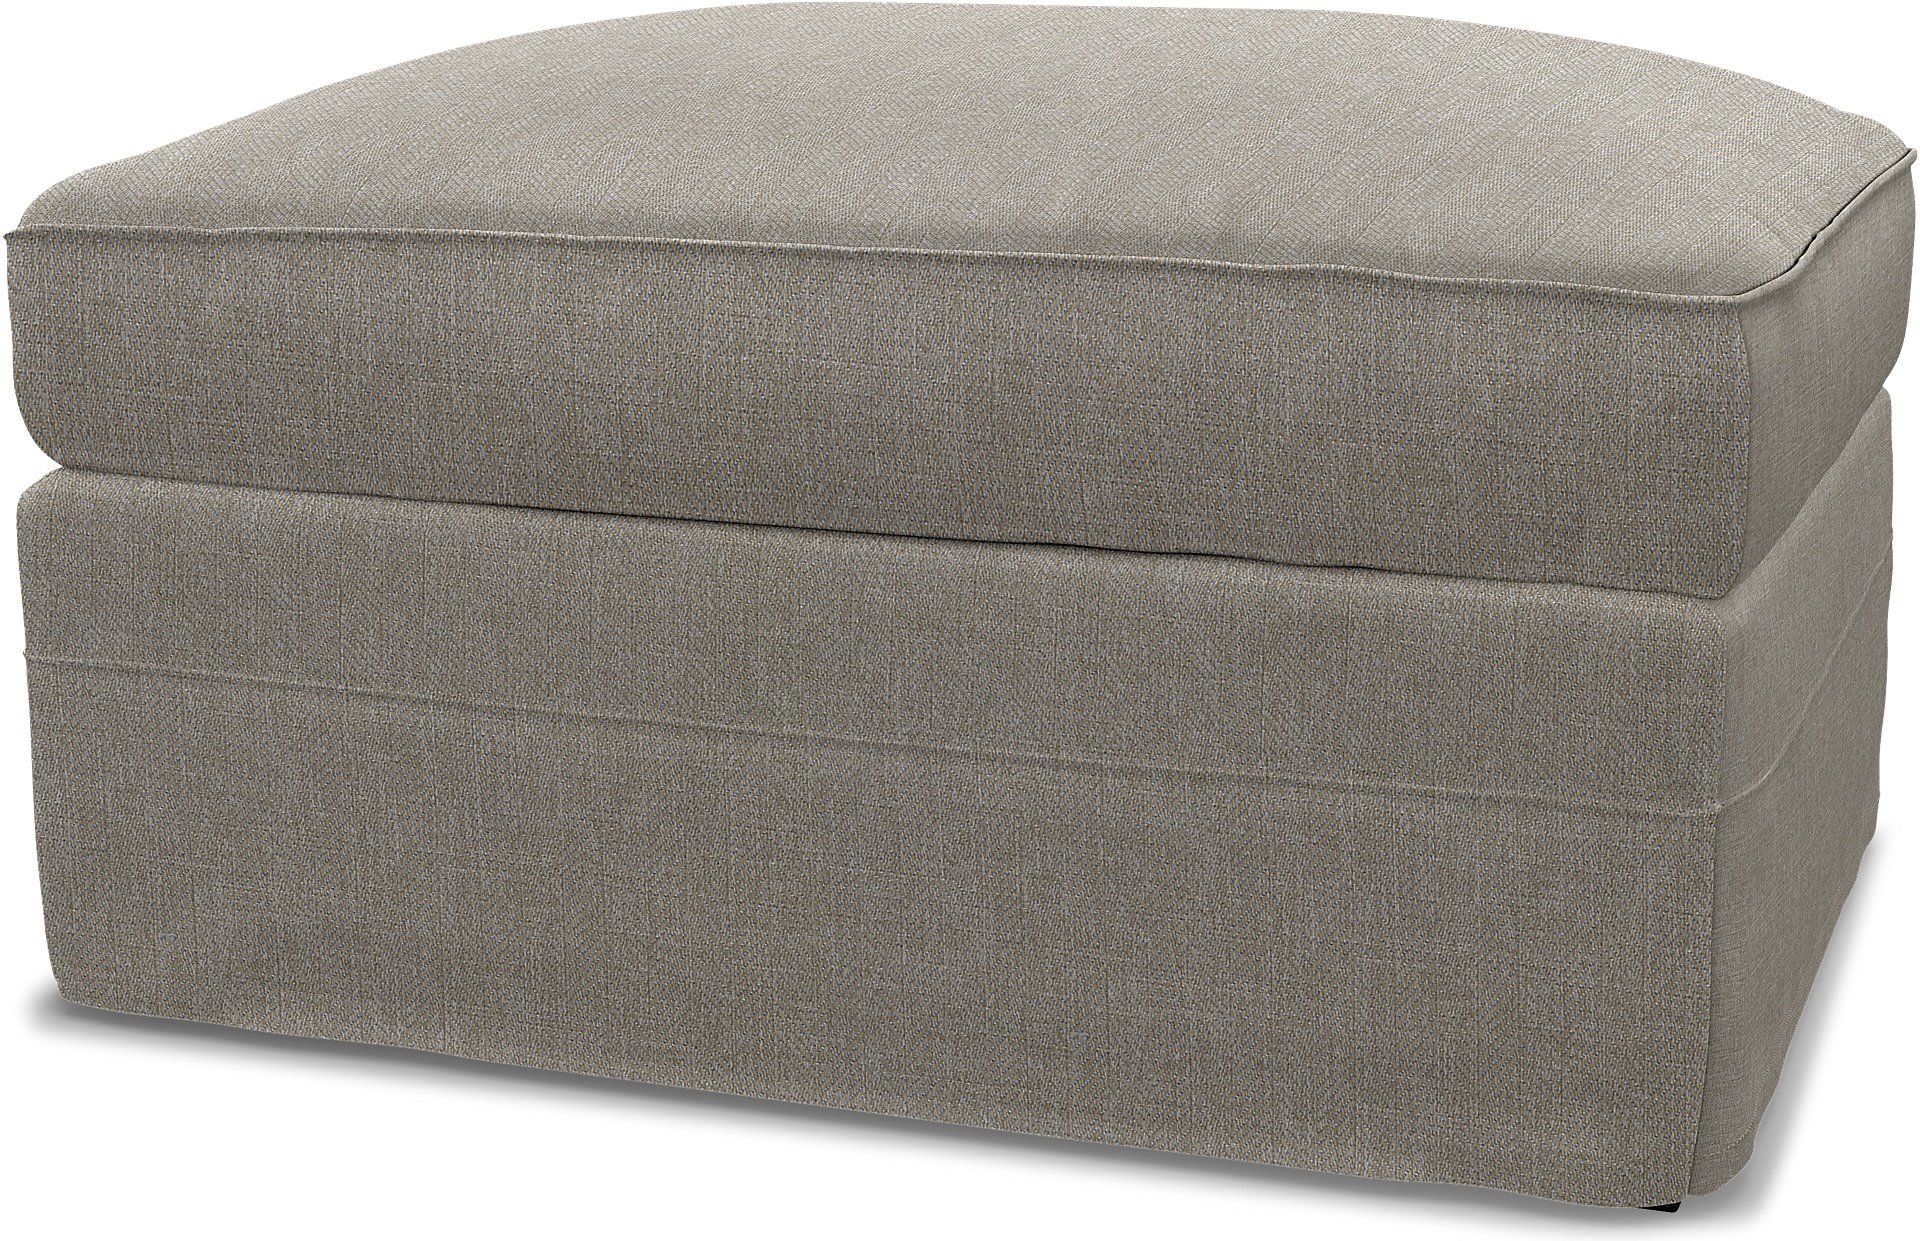 IKEA - Gronlid Footstool with Storage Cover, Greige, Boucle & Texture - Bemz